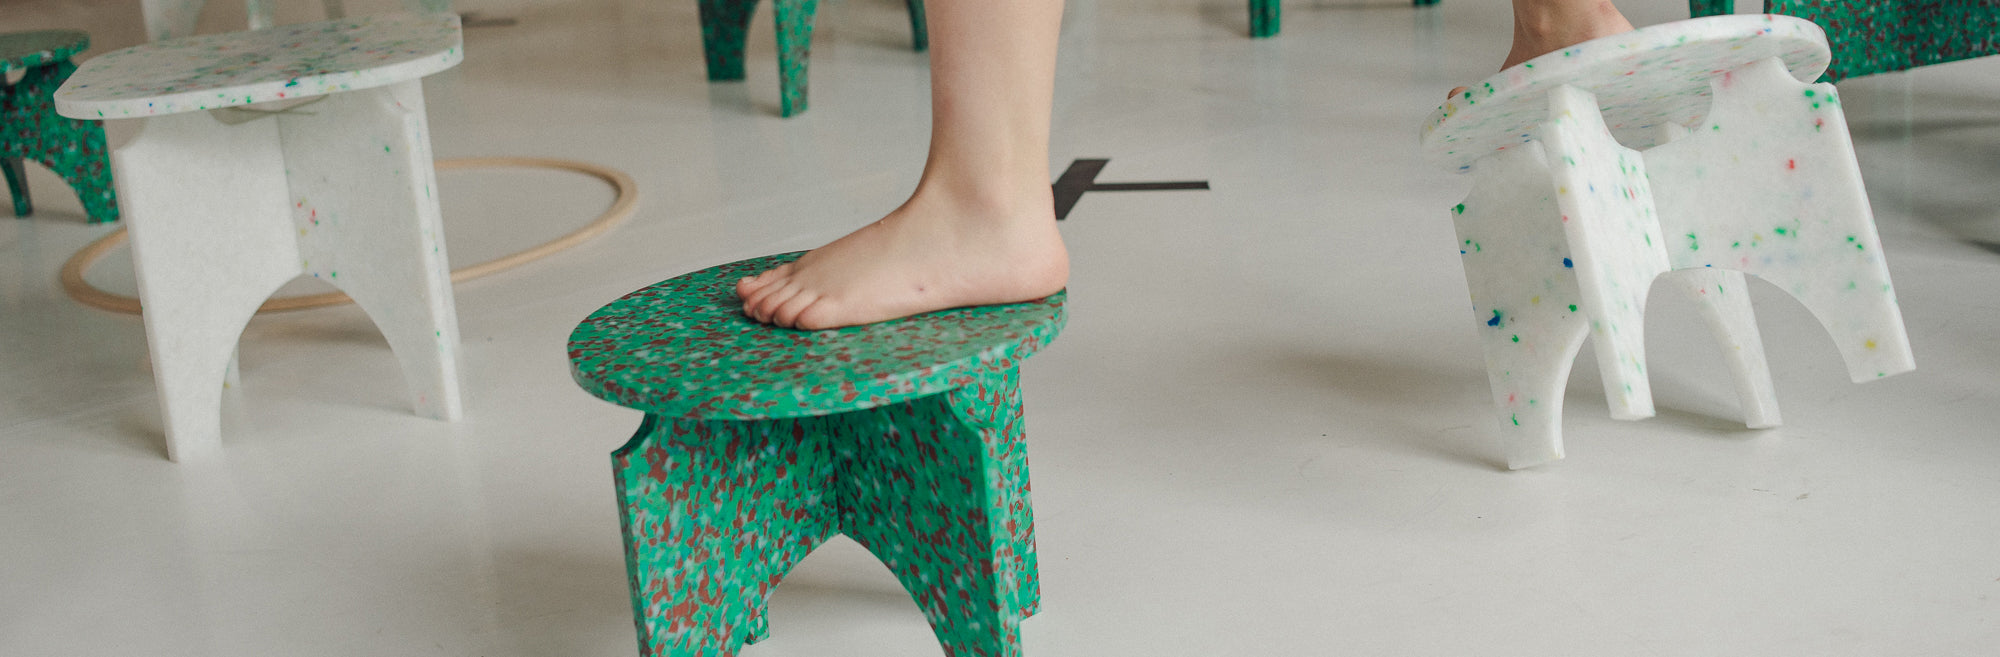 CHAIRS BY THE MINIMONO PROJECT - BRAND FOR ECO FRIENDLY - PLAYFUL - MULTI FUNCTIONAL - SUSTAINABLE - HIGH QUALITY - DESIGN FURNITURE FROM RECYCLED PLASTIC FOR BOTH ADULT AND CHILDREN MADE IN BERLIN GERMANY